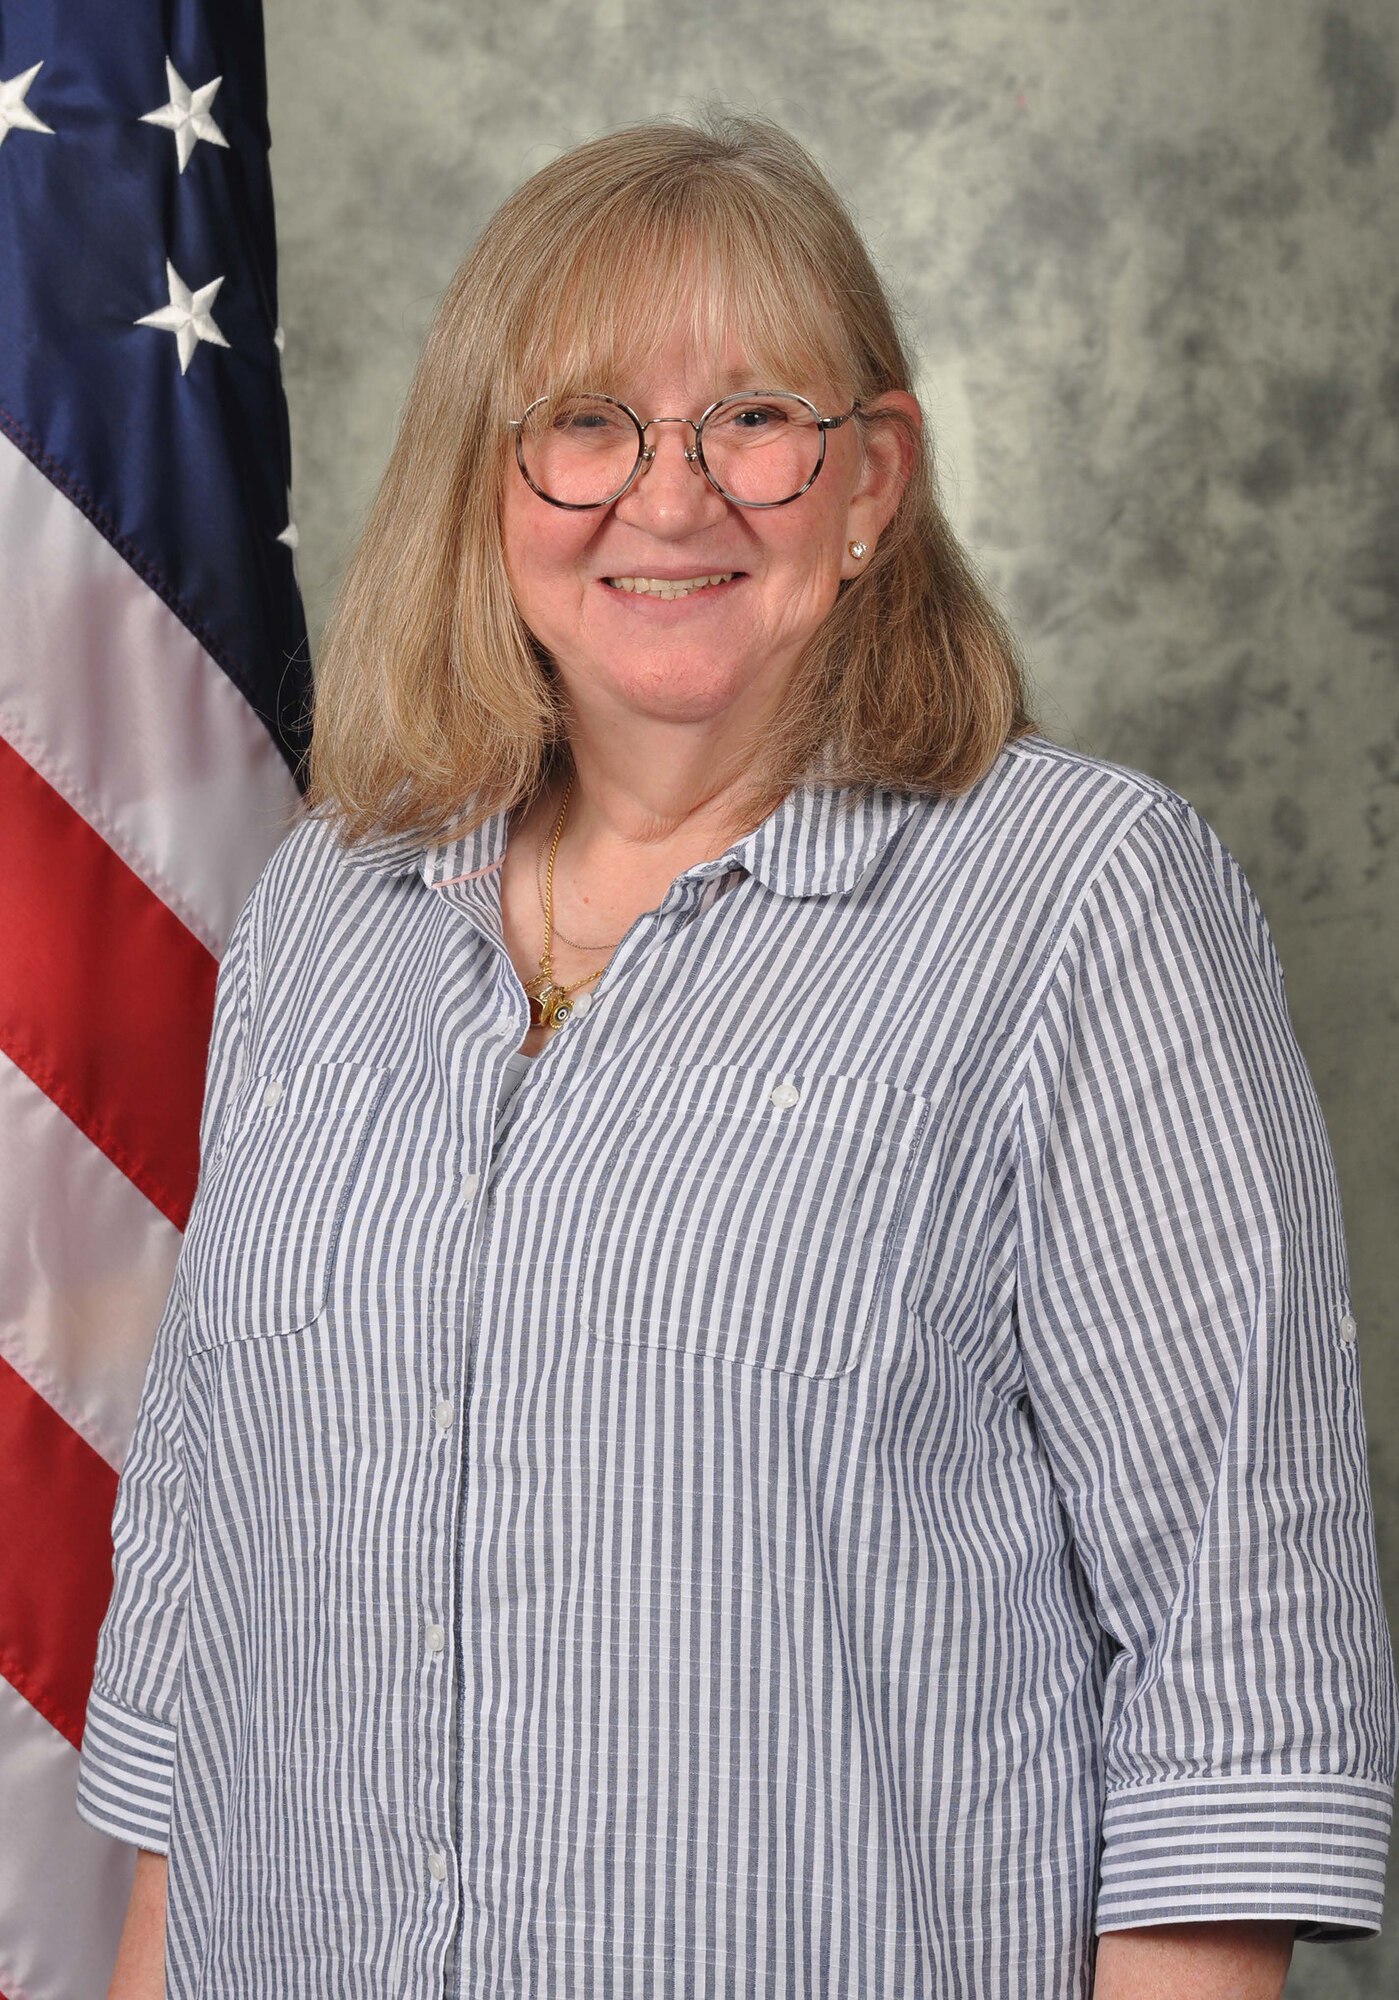 Linda Ewings, the installation deployment officer with the 72nd Logistics Readiness Squadron, has 40 years of combined active duty and civil service.